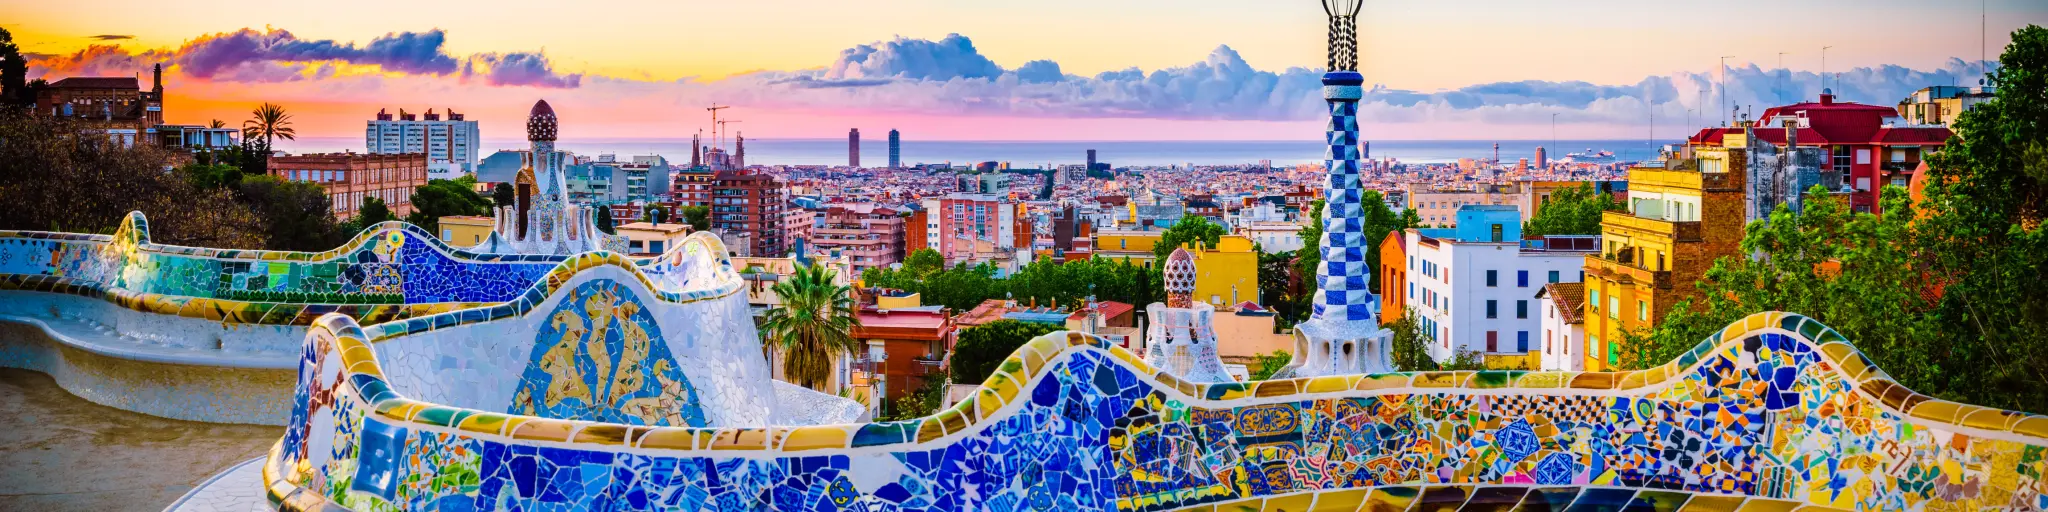 Barcelona at sunrise viewed from park Guell